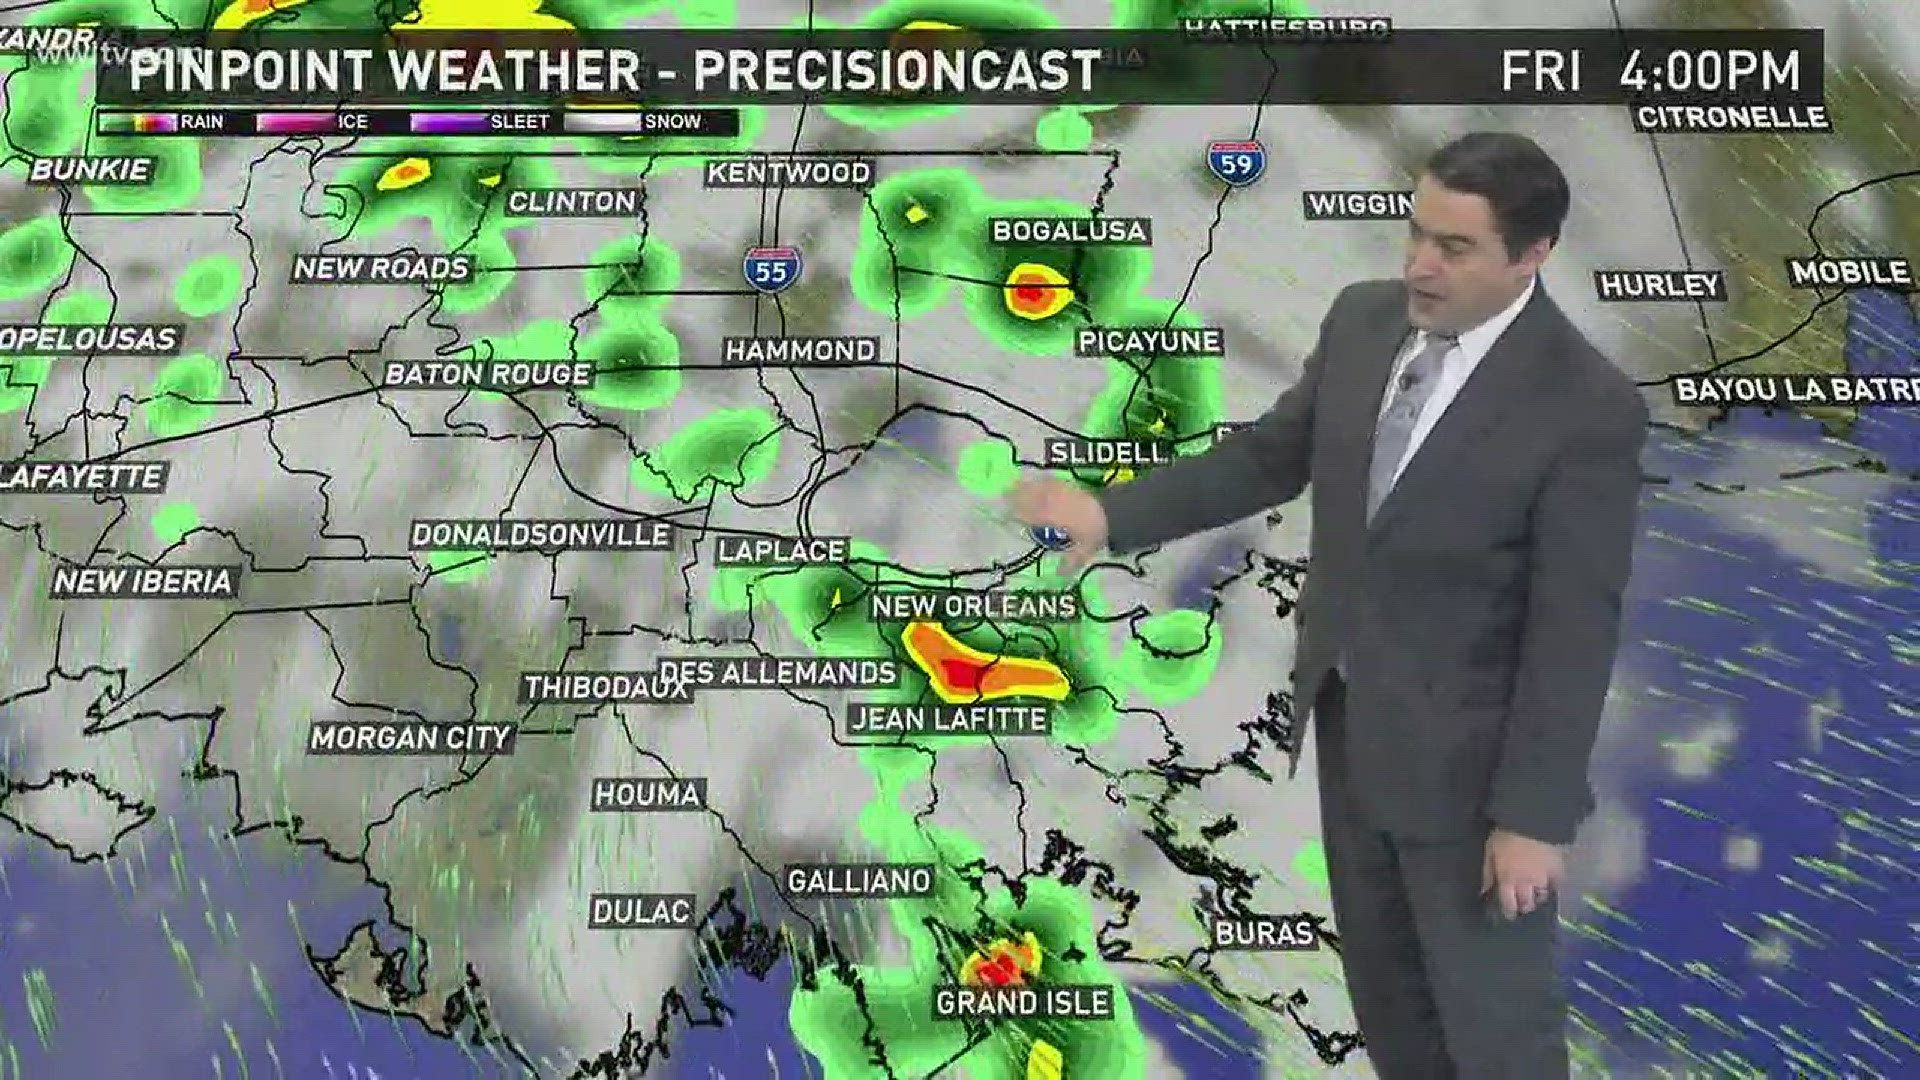 Meteorologist Dave Nussbaum says we will have scattered storms with a record high today. Then strong storms are possible this weekend.